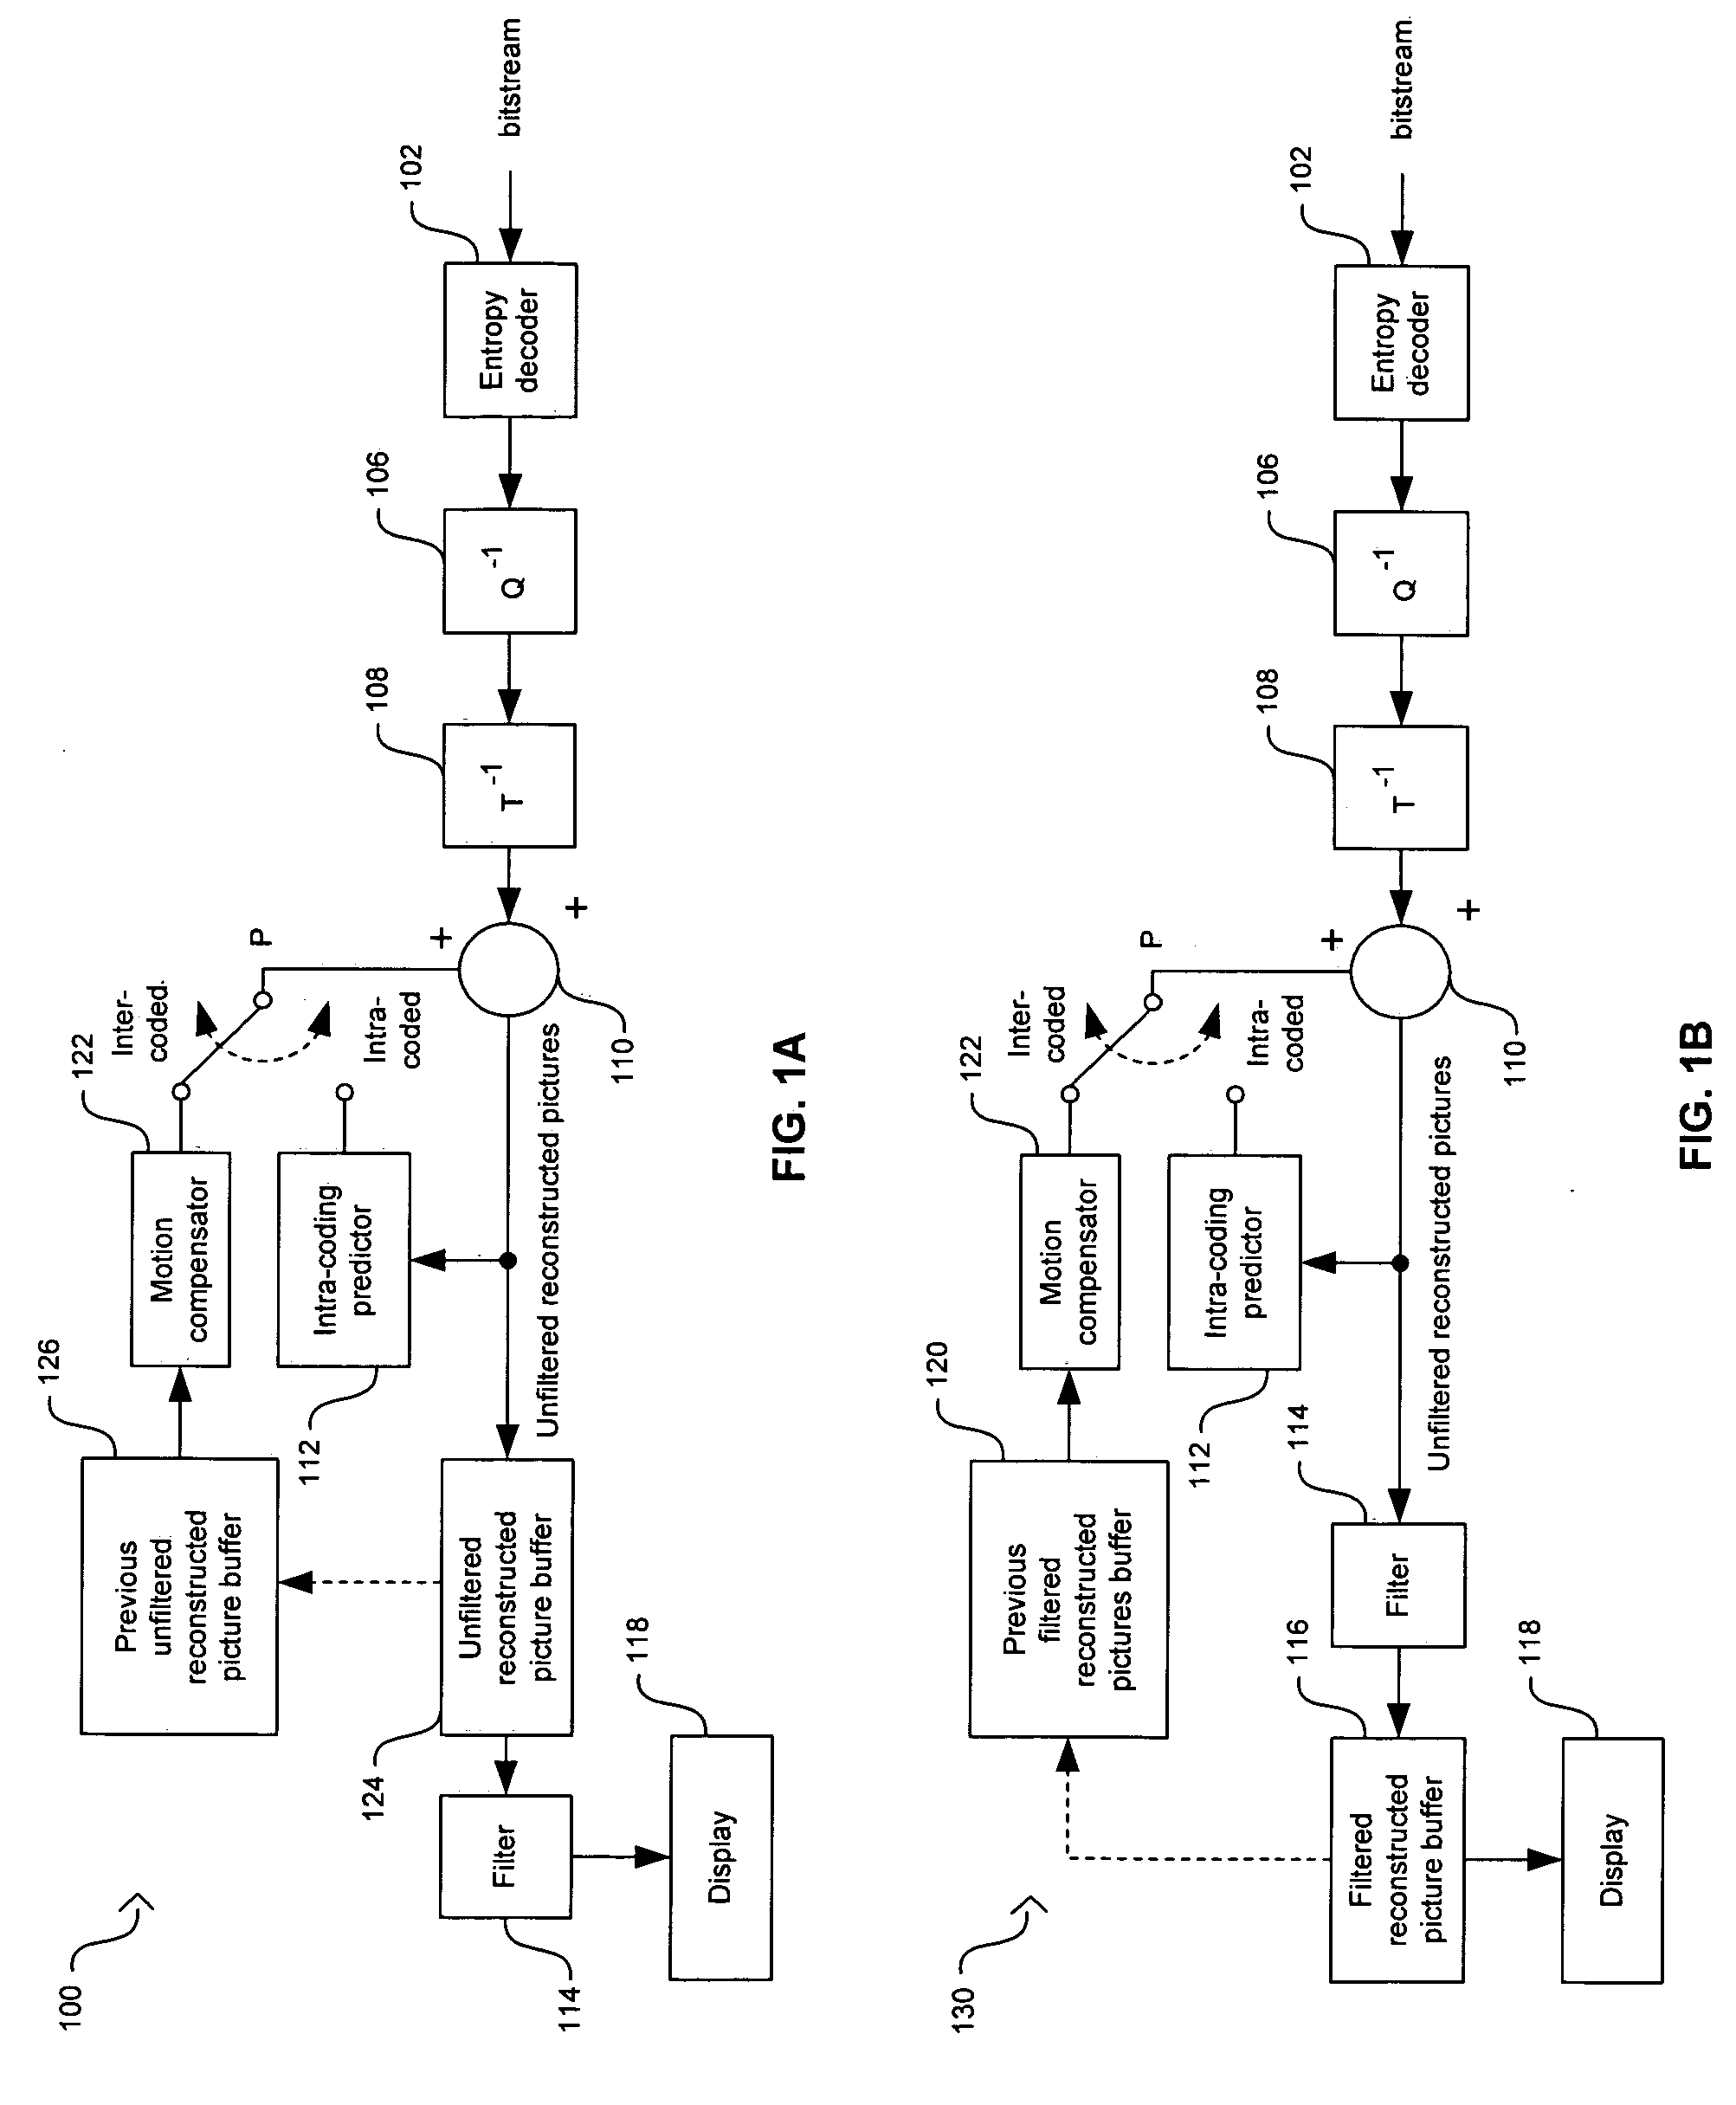 Method and system for a parametrized multi-standard deblocking filter for video compression systems